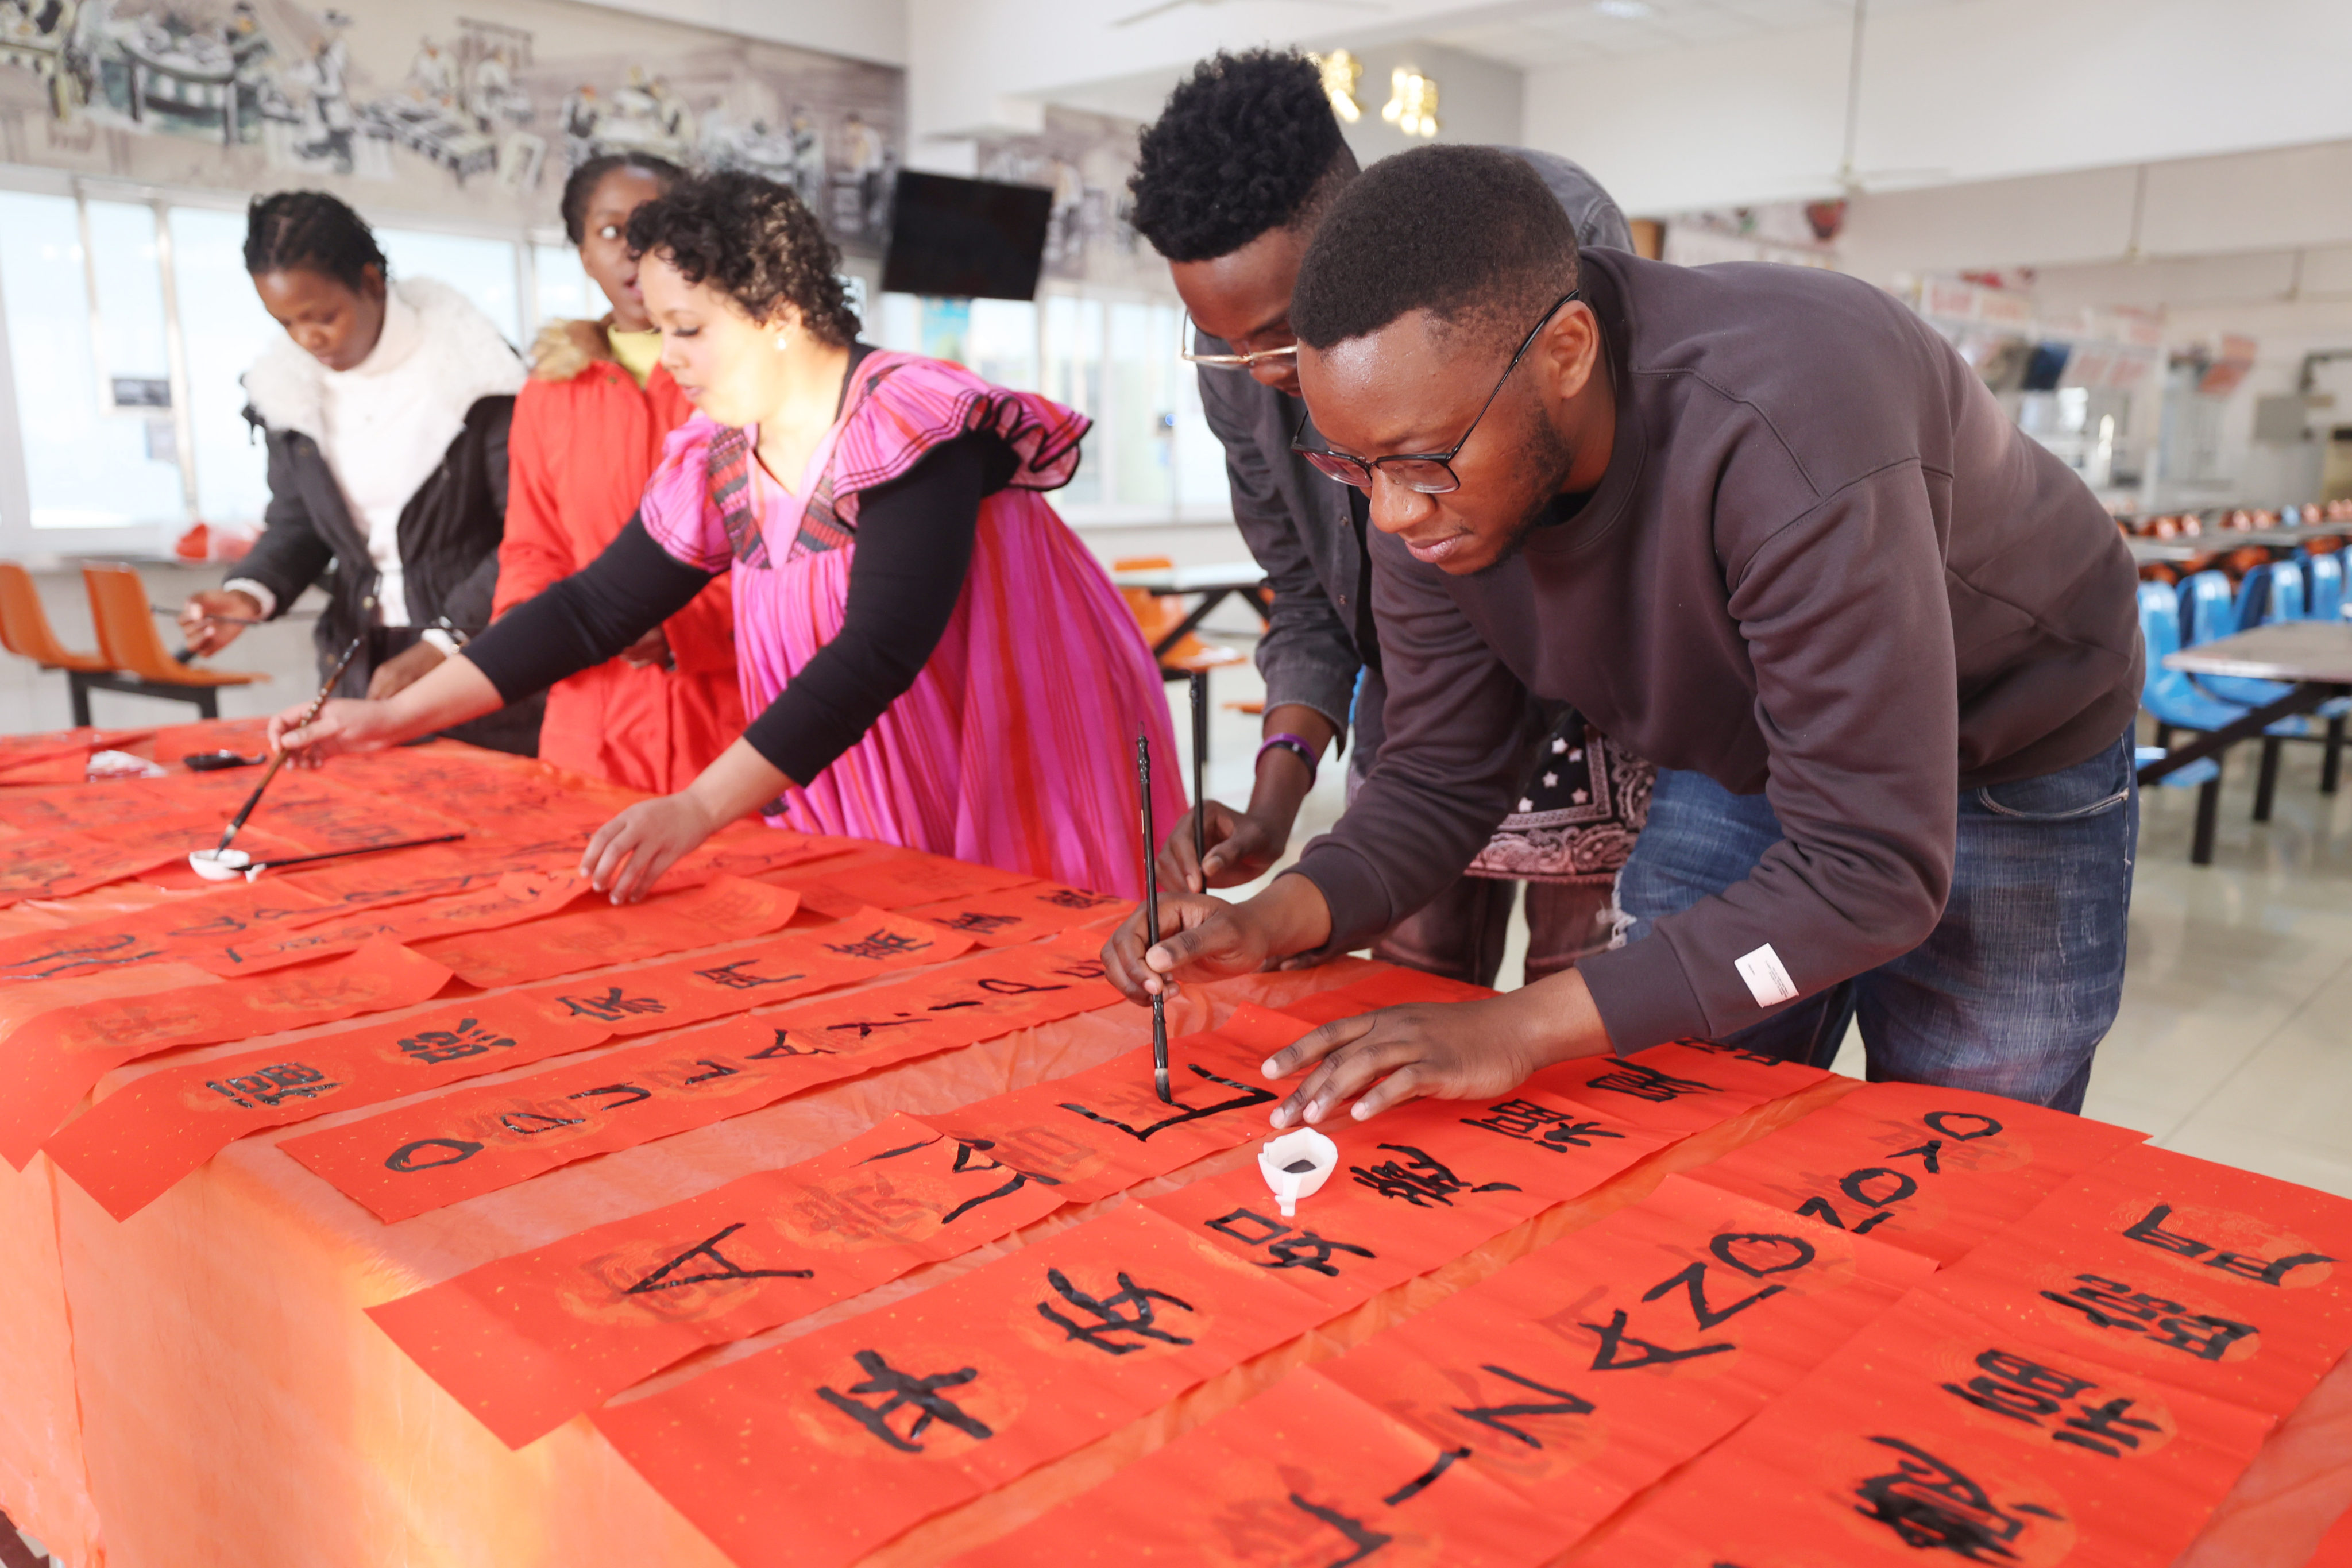 Foreign students studying Chinese in China should be able to show some level of language proficiency, according to a CPPCC member. Photo: Getty Images